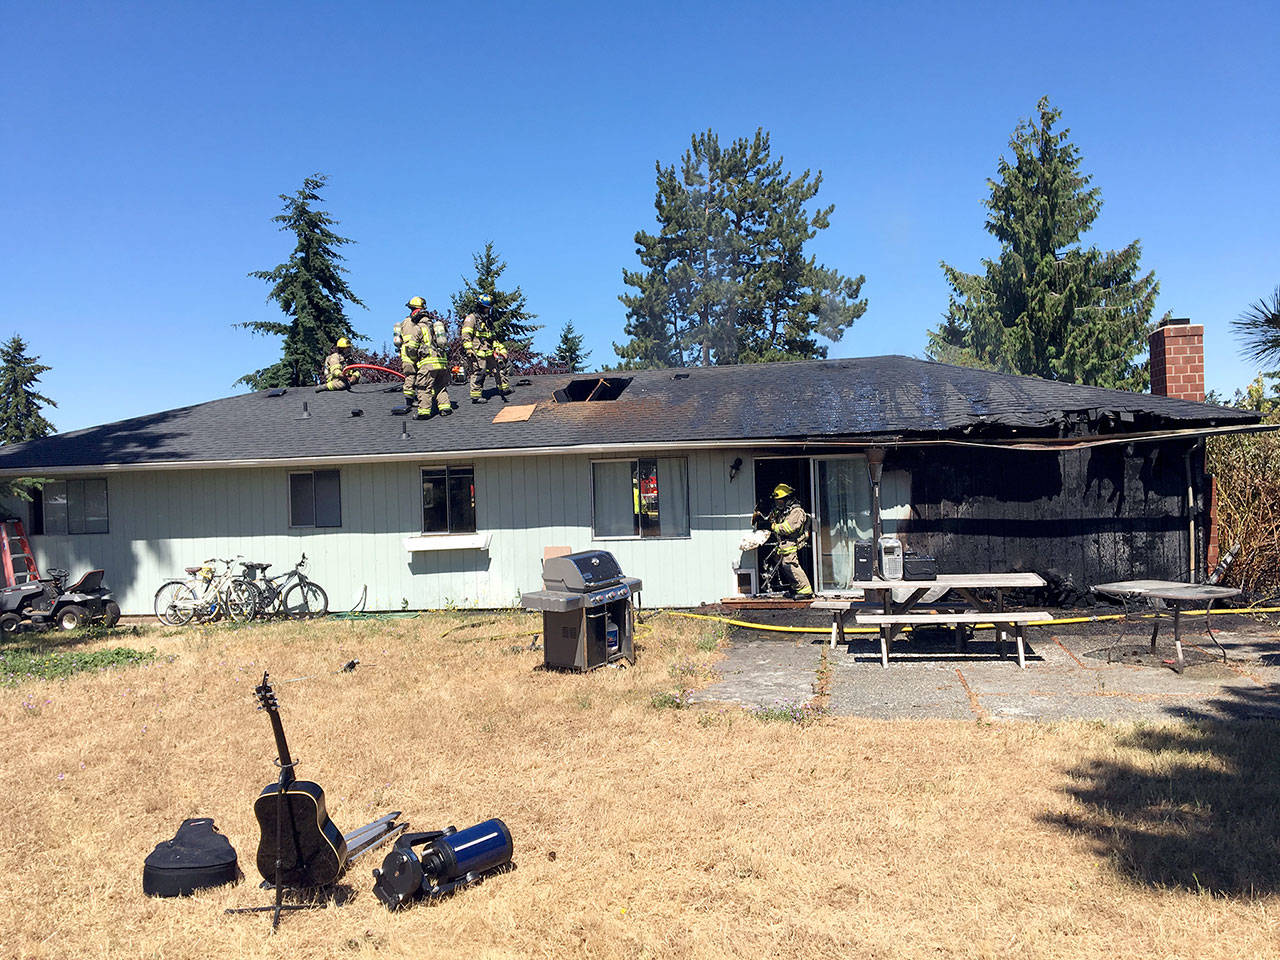 On Tuesday, Clallam County Fire District 3 responded to a report of a smoke investigation call at 50 Bennett Place. (Clallam County Fire District 3)